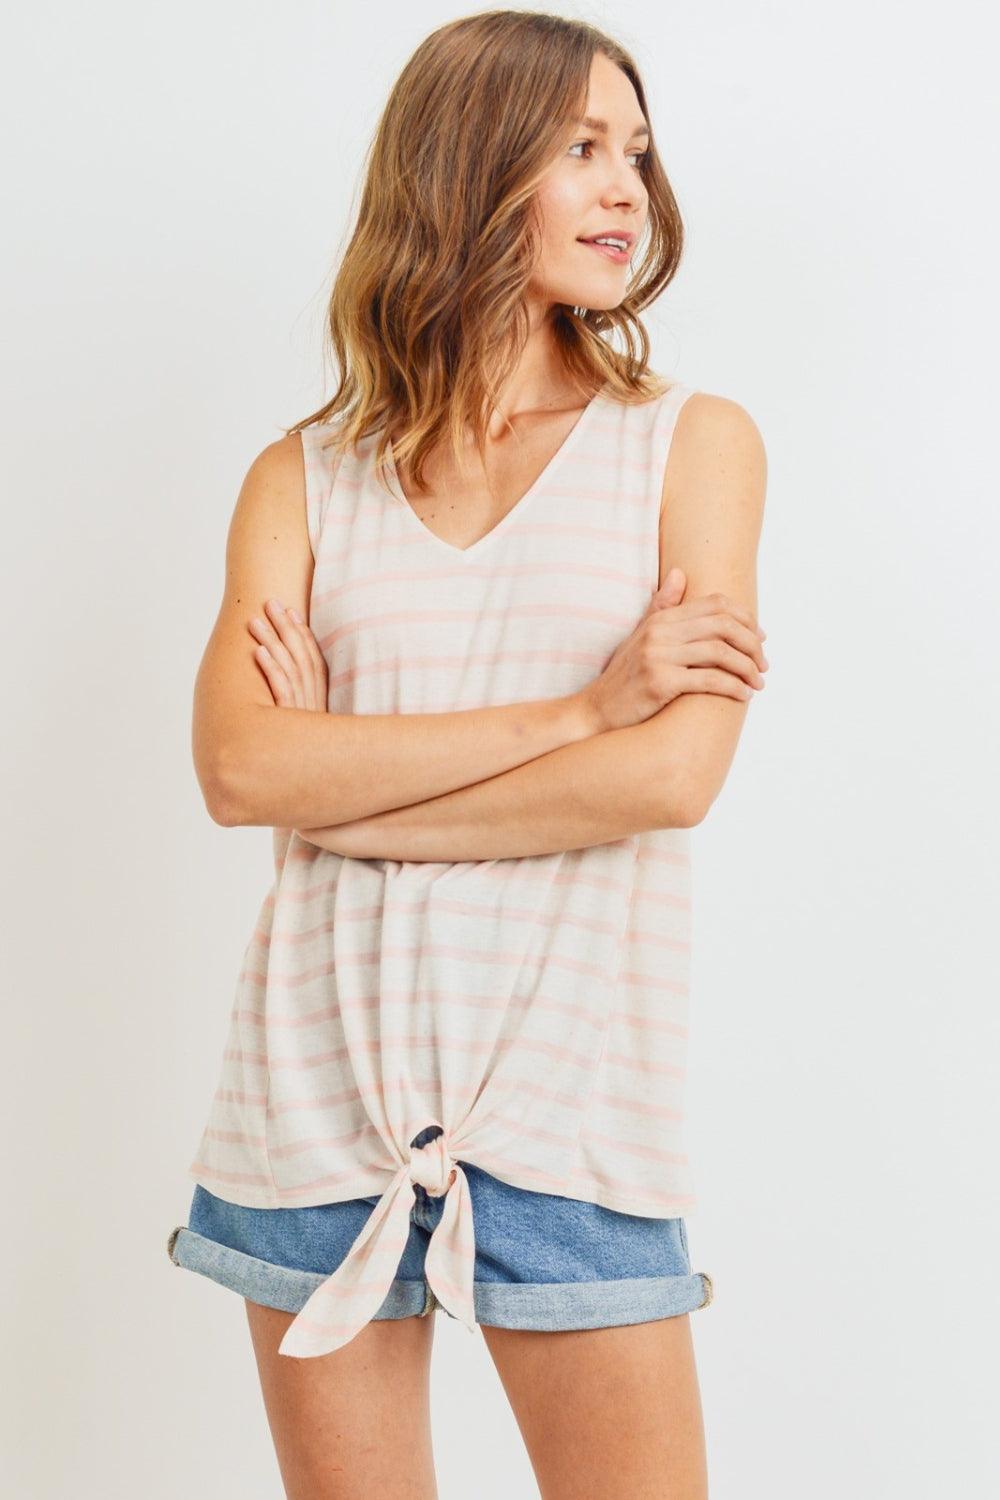 Cotton Bleu by Nu Label Sleeveless Front Tie Striped Top Coral Tank Tops